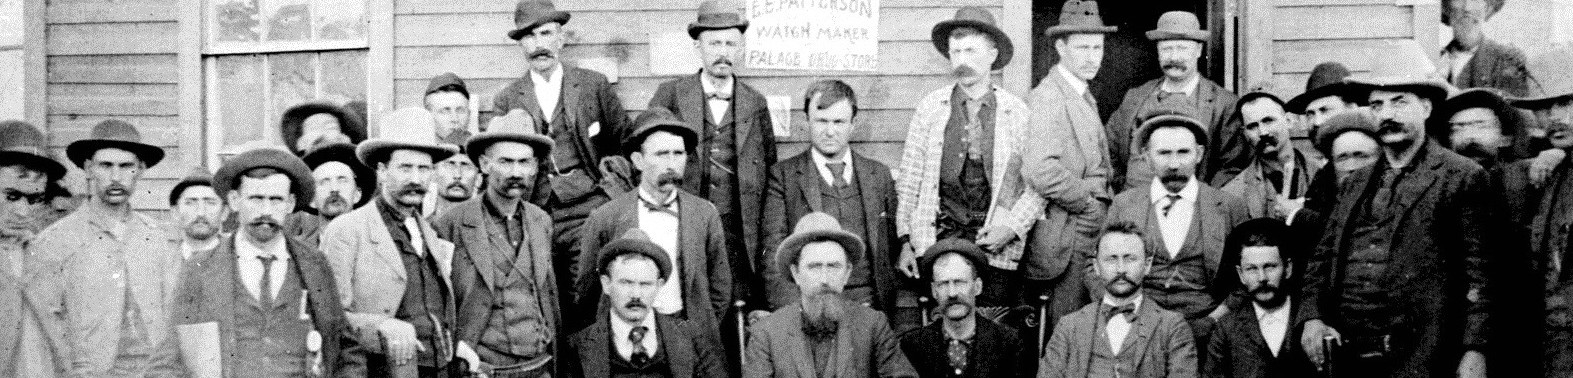 Clerical force and U. S. Deputy Marshals at the U.S. Land Office in Okla. Terr., in 1893